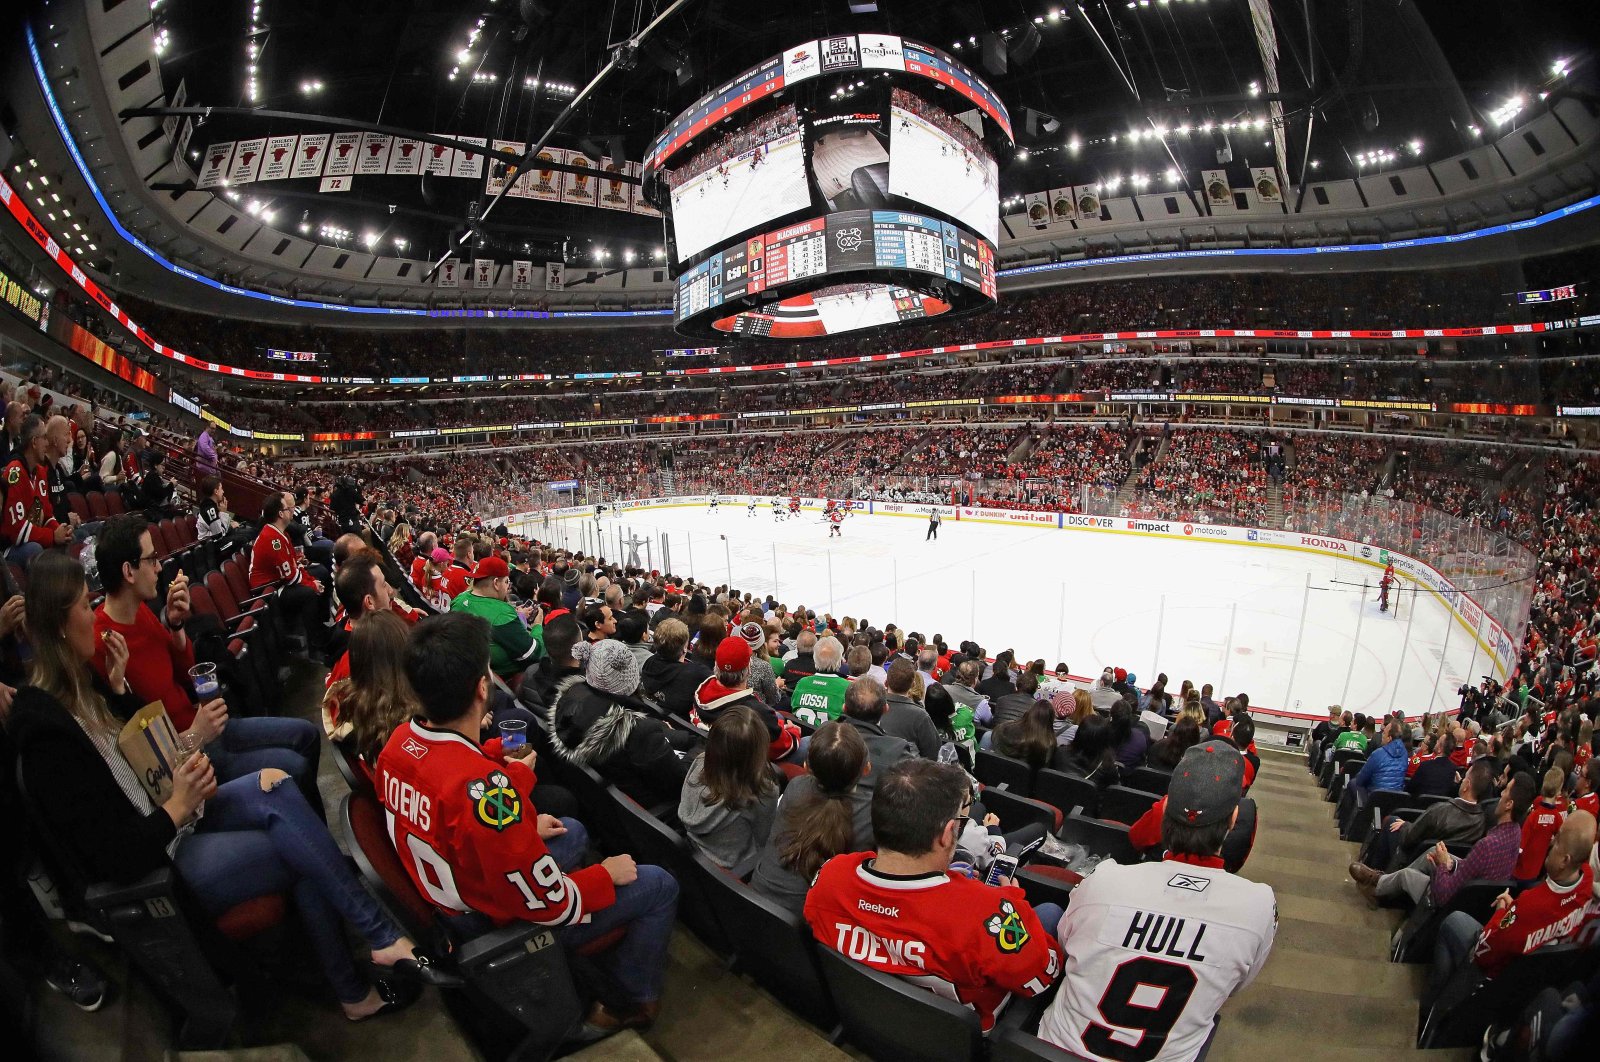 Fans watch as the Chicago Blackhawks take on the San Jose Sharks, in Chicago, Illinois, U.S., March 11, 2020. (AFP Photo)